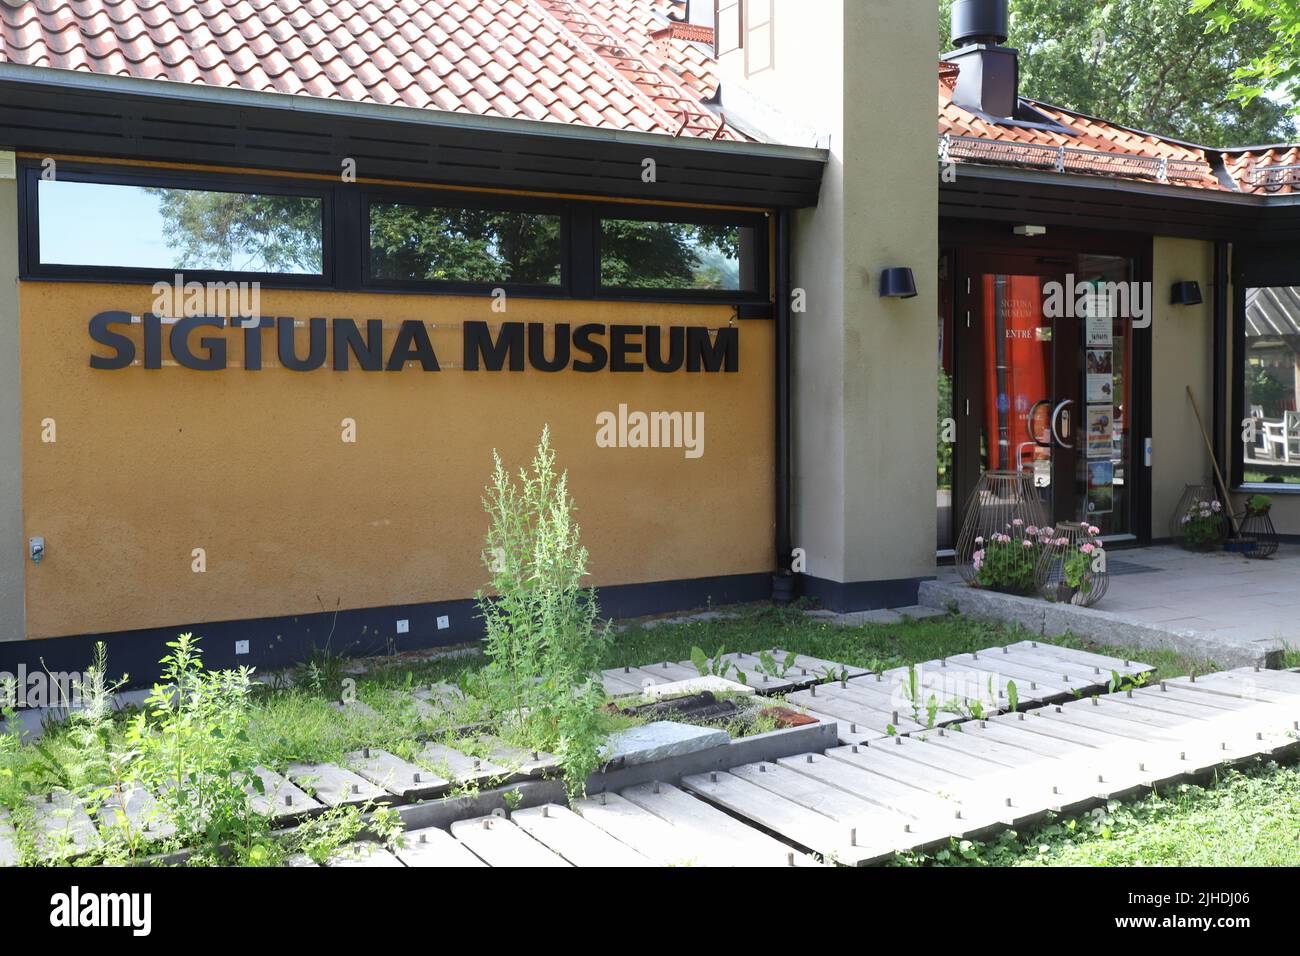 Sigtuna, Sweden - July 2, 2022: The entrance to the Sigtuna museum. Stock Photo